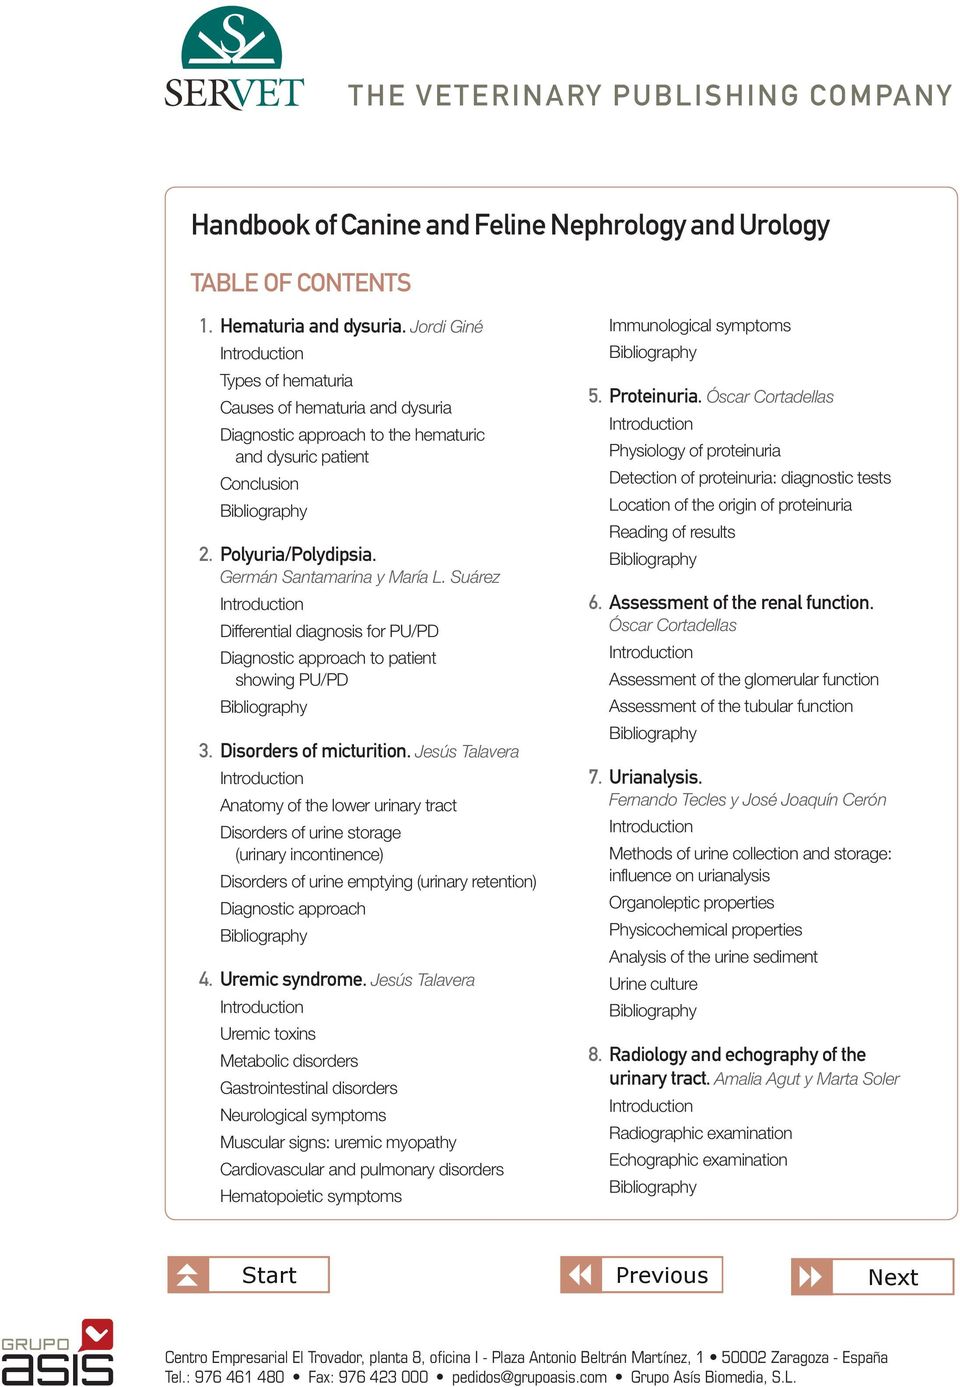 Suárez Differential diagnosis for PU/PD Diagnostic approach to patient showing PU/PD 3. Disorders of micturition.